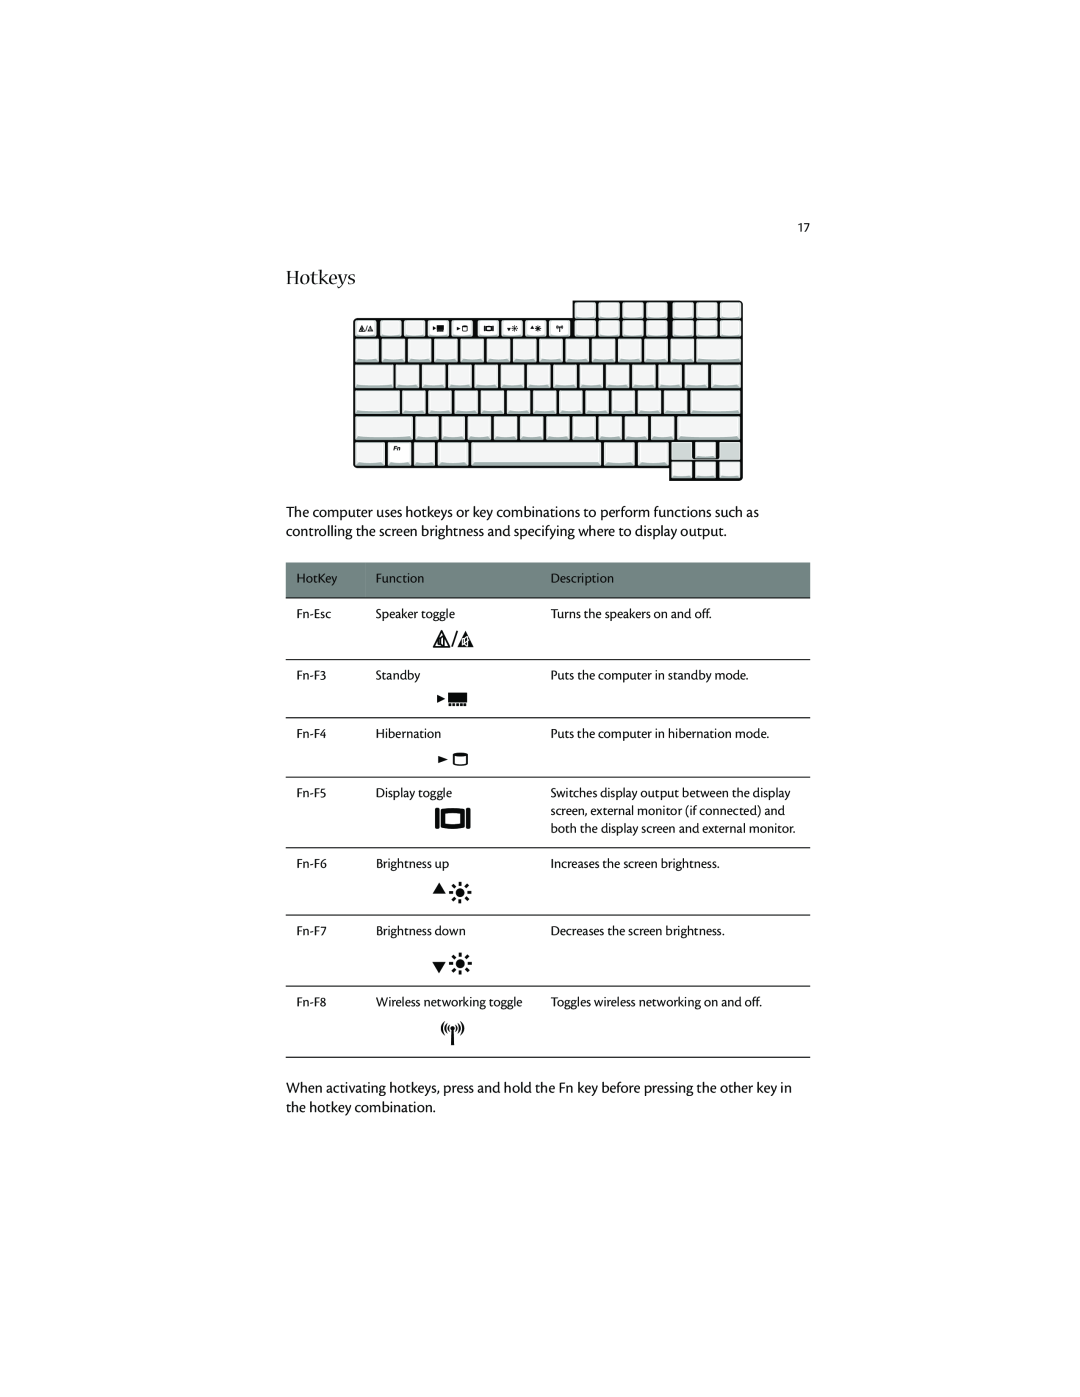 Acer 1400 manual Hotkeys, Switches display output between the display, screen, external monitor if connected and 